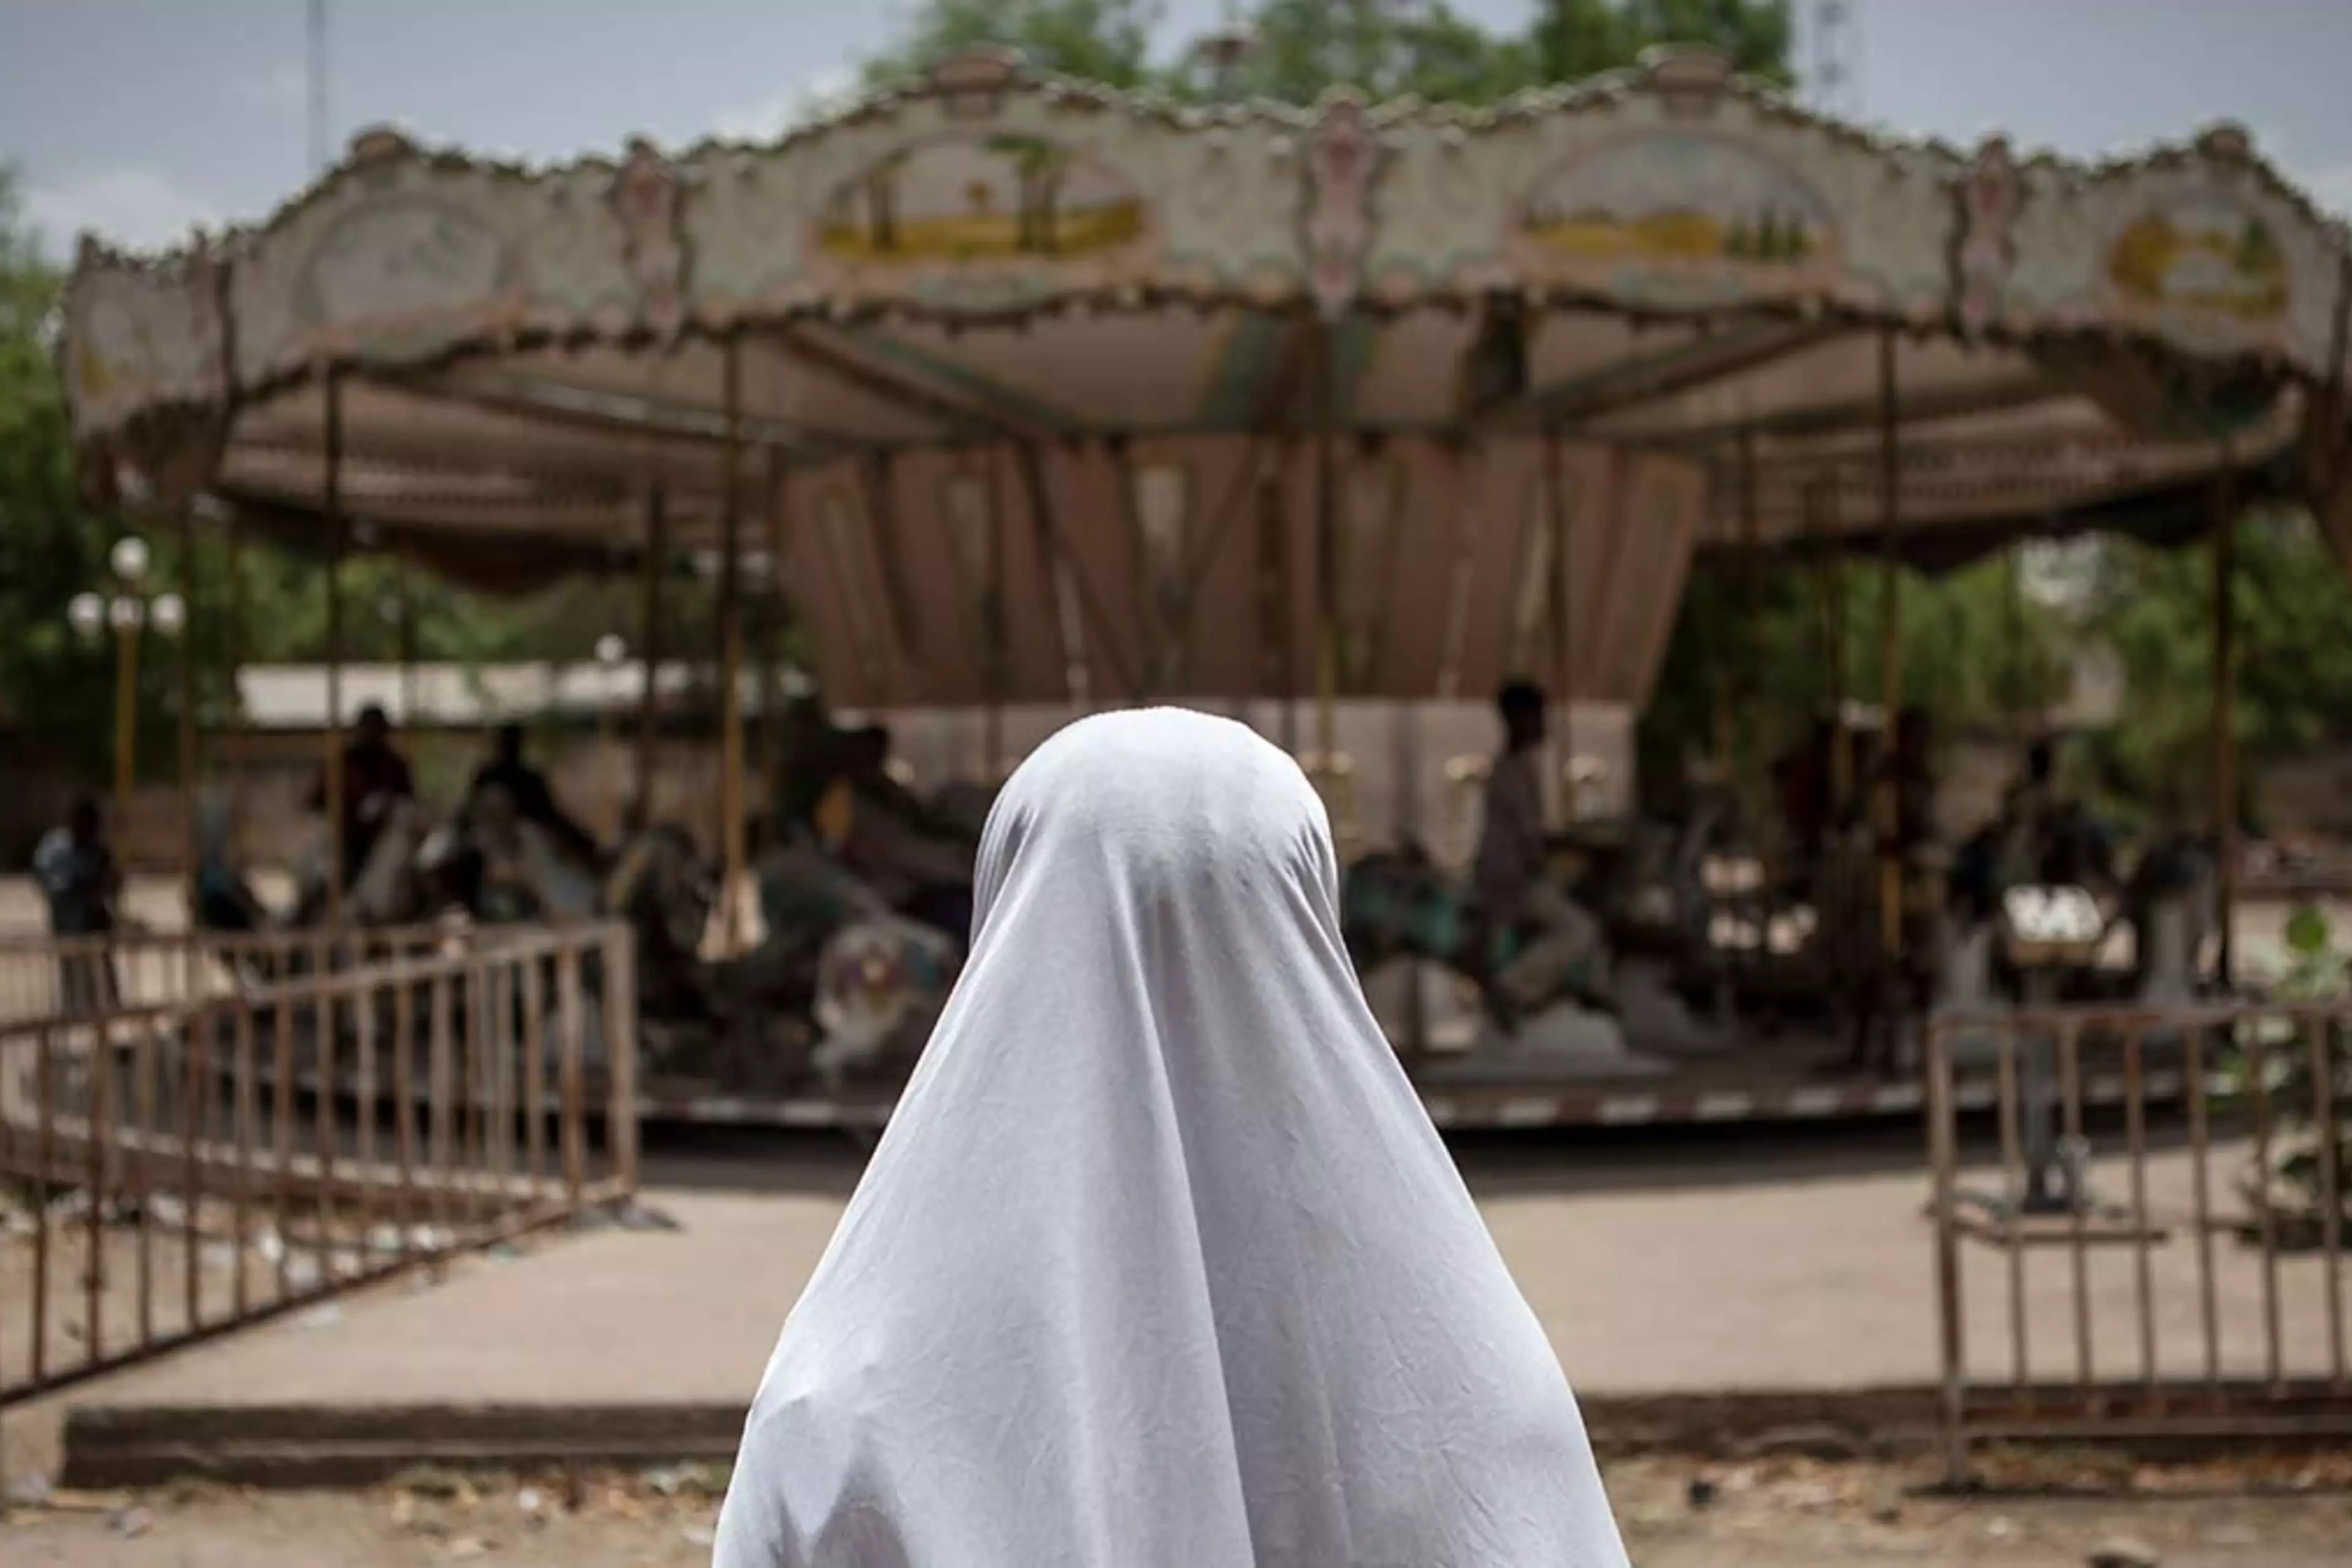 A girl watches a merry-go-round at an abandoned amusement park in Maiduguri, Nigeria.